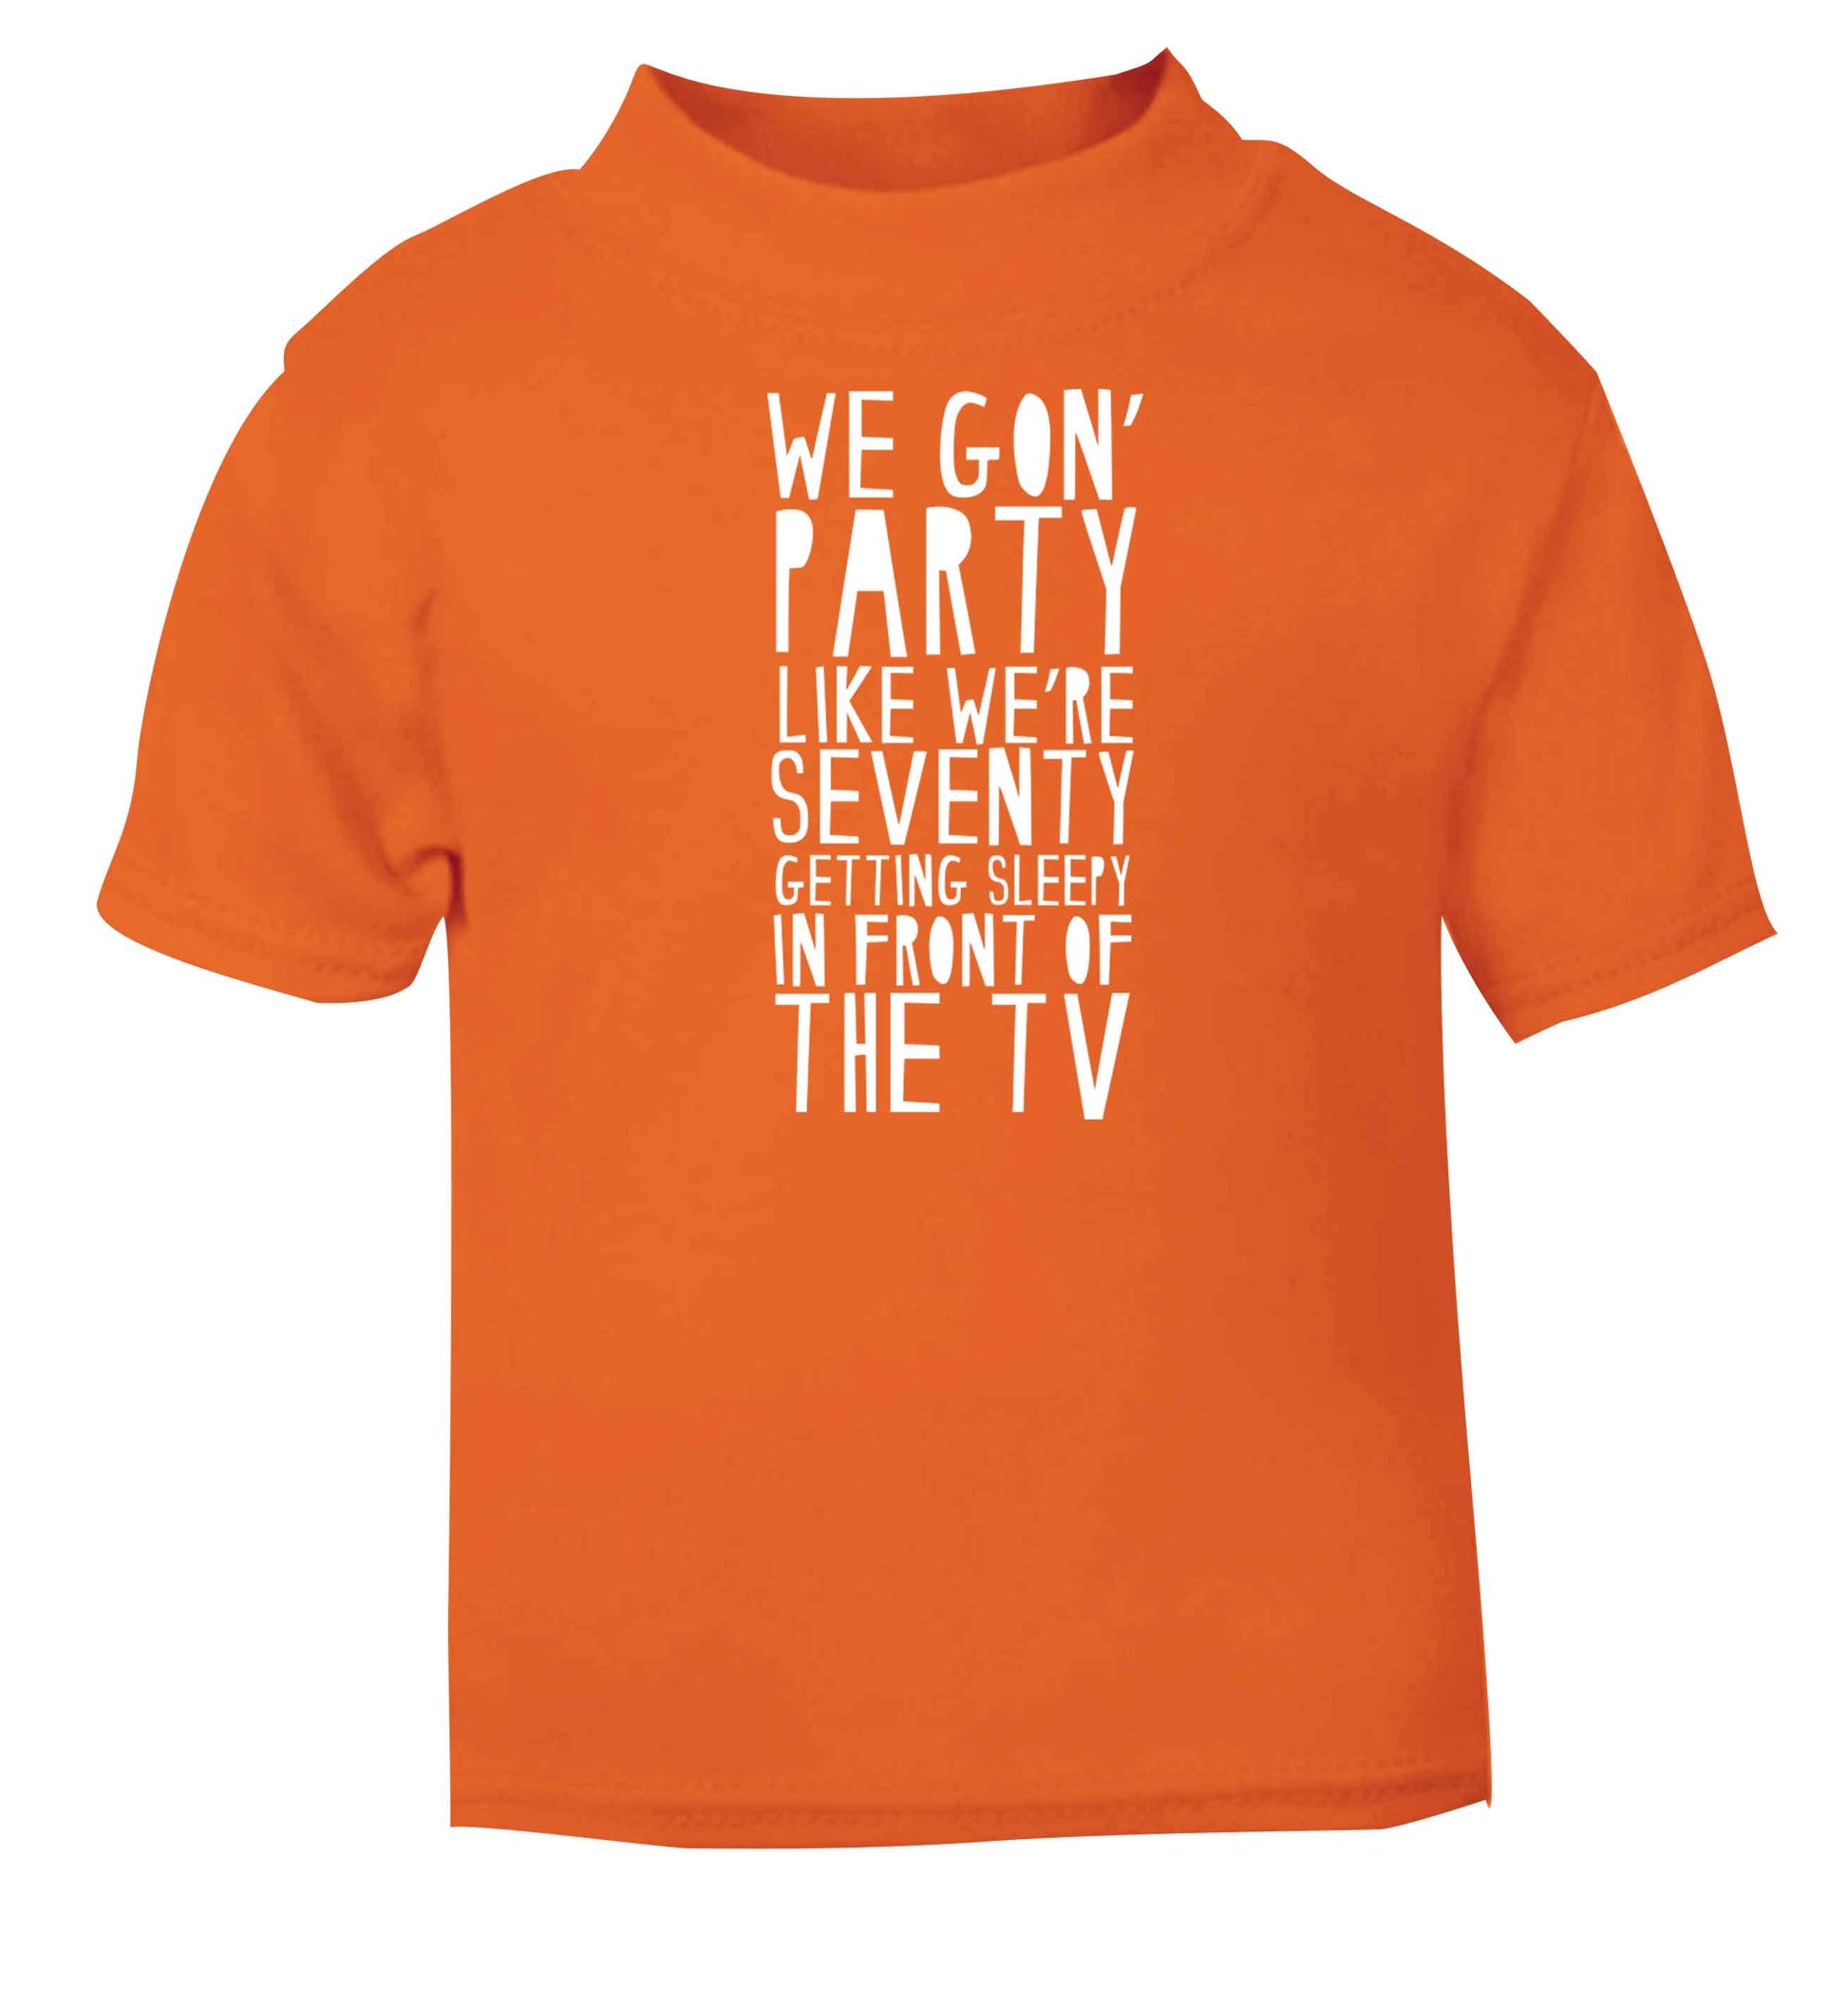 We gon' party like we're seventy getting sleepy in front of the TV orange baby toddler Tshirt 2 Years